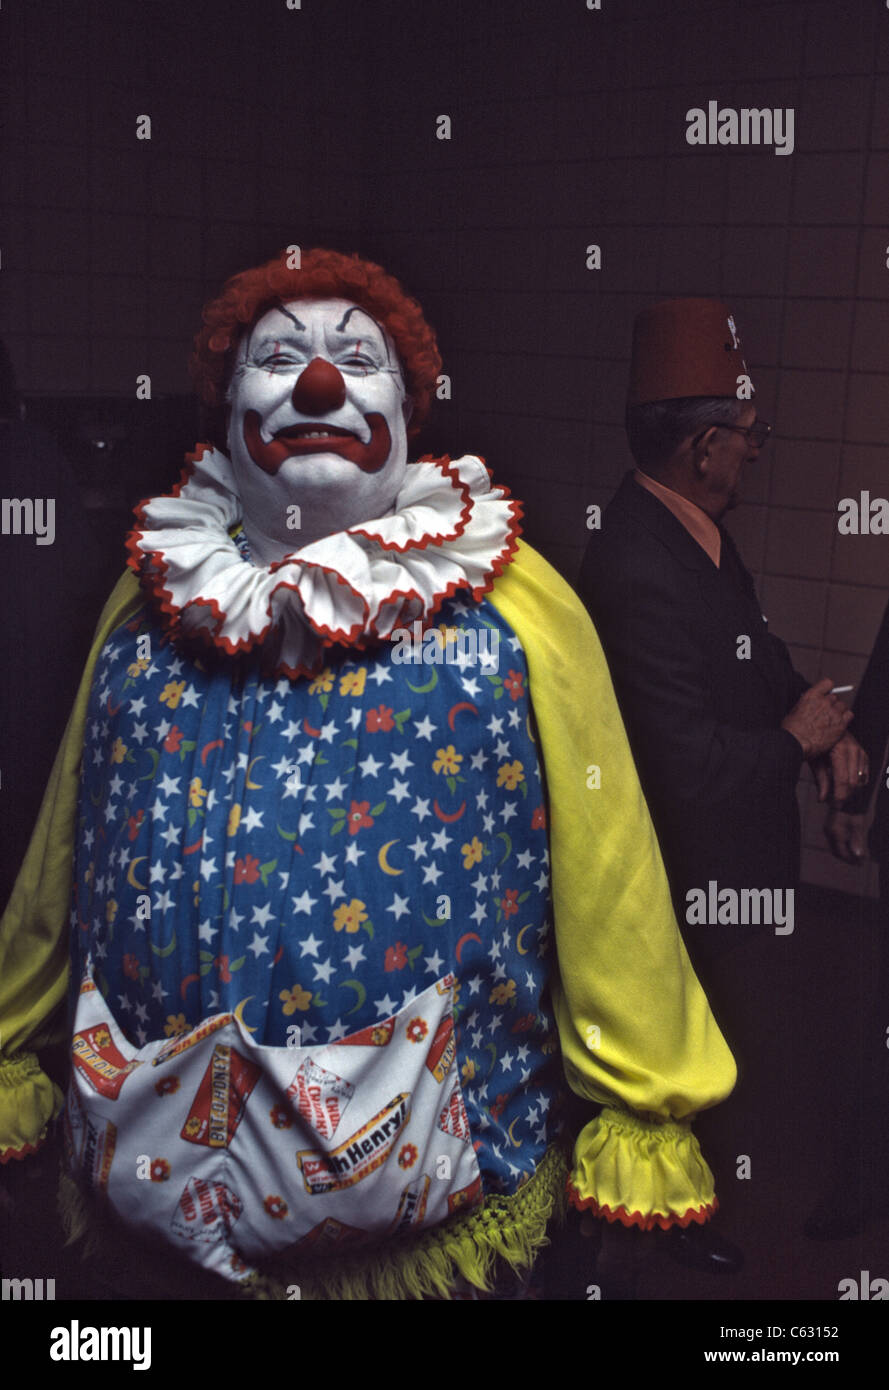 Clown full costume and make-up Stock Photo